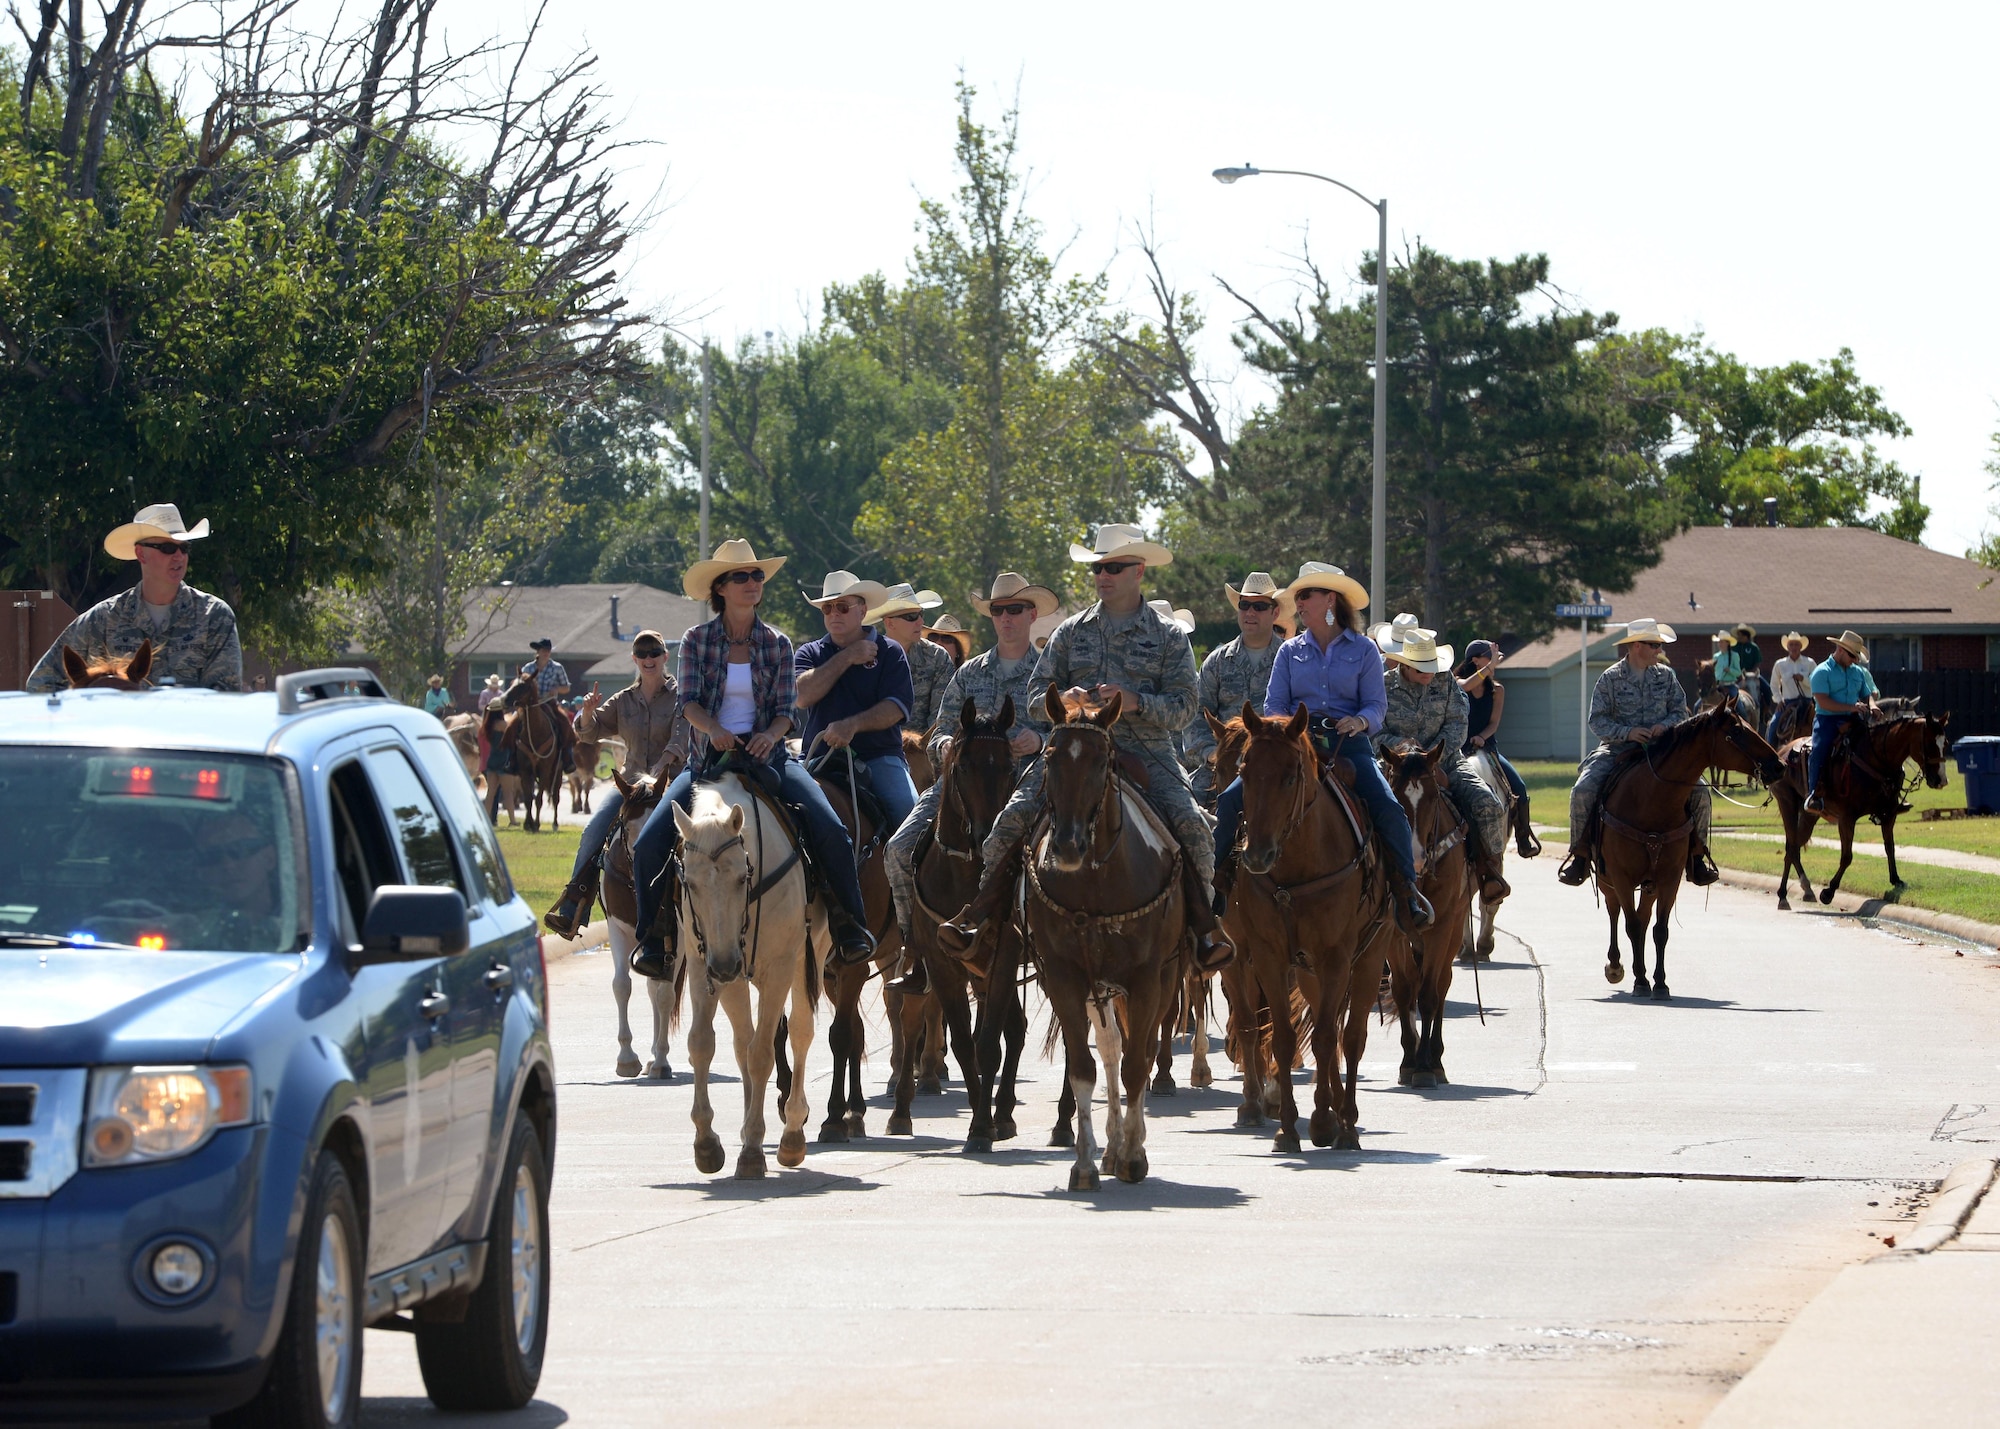 Altus Air Force Base leaders and local members of the community lead Texas Longhorn cattle through Altus AFB during the 18th annual Cattle Drive, Aug. 25, 2016. Approximately 18 Texas Longhorn cattle were driven through Altus AFB at this year’s base Cattle Drive which provided opportunity for community members to share part of their culture with the Airmen and their families. (U.S. Air Force photo by Airman 1st Class Cody Dowell)	